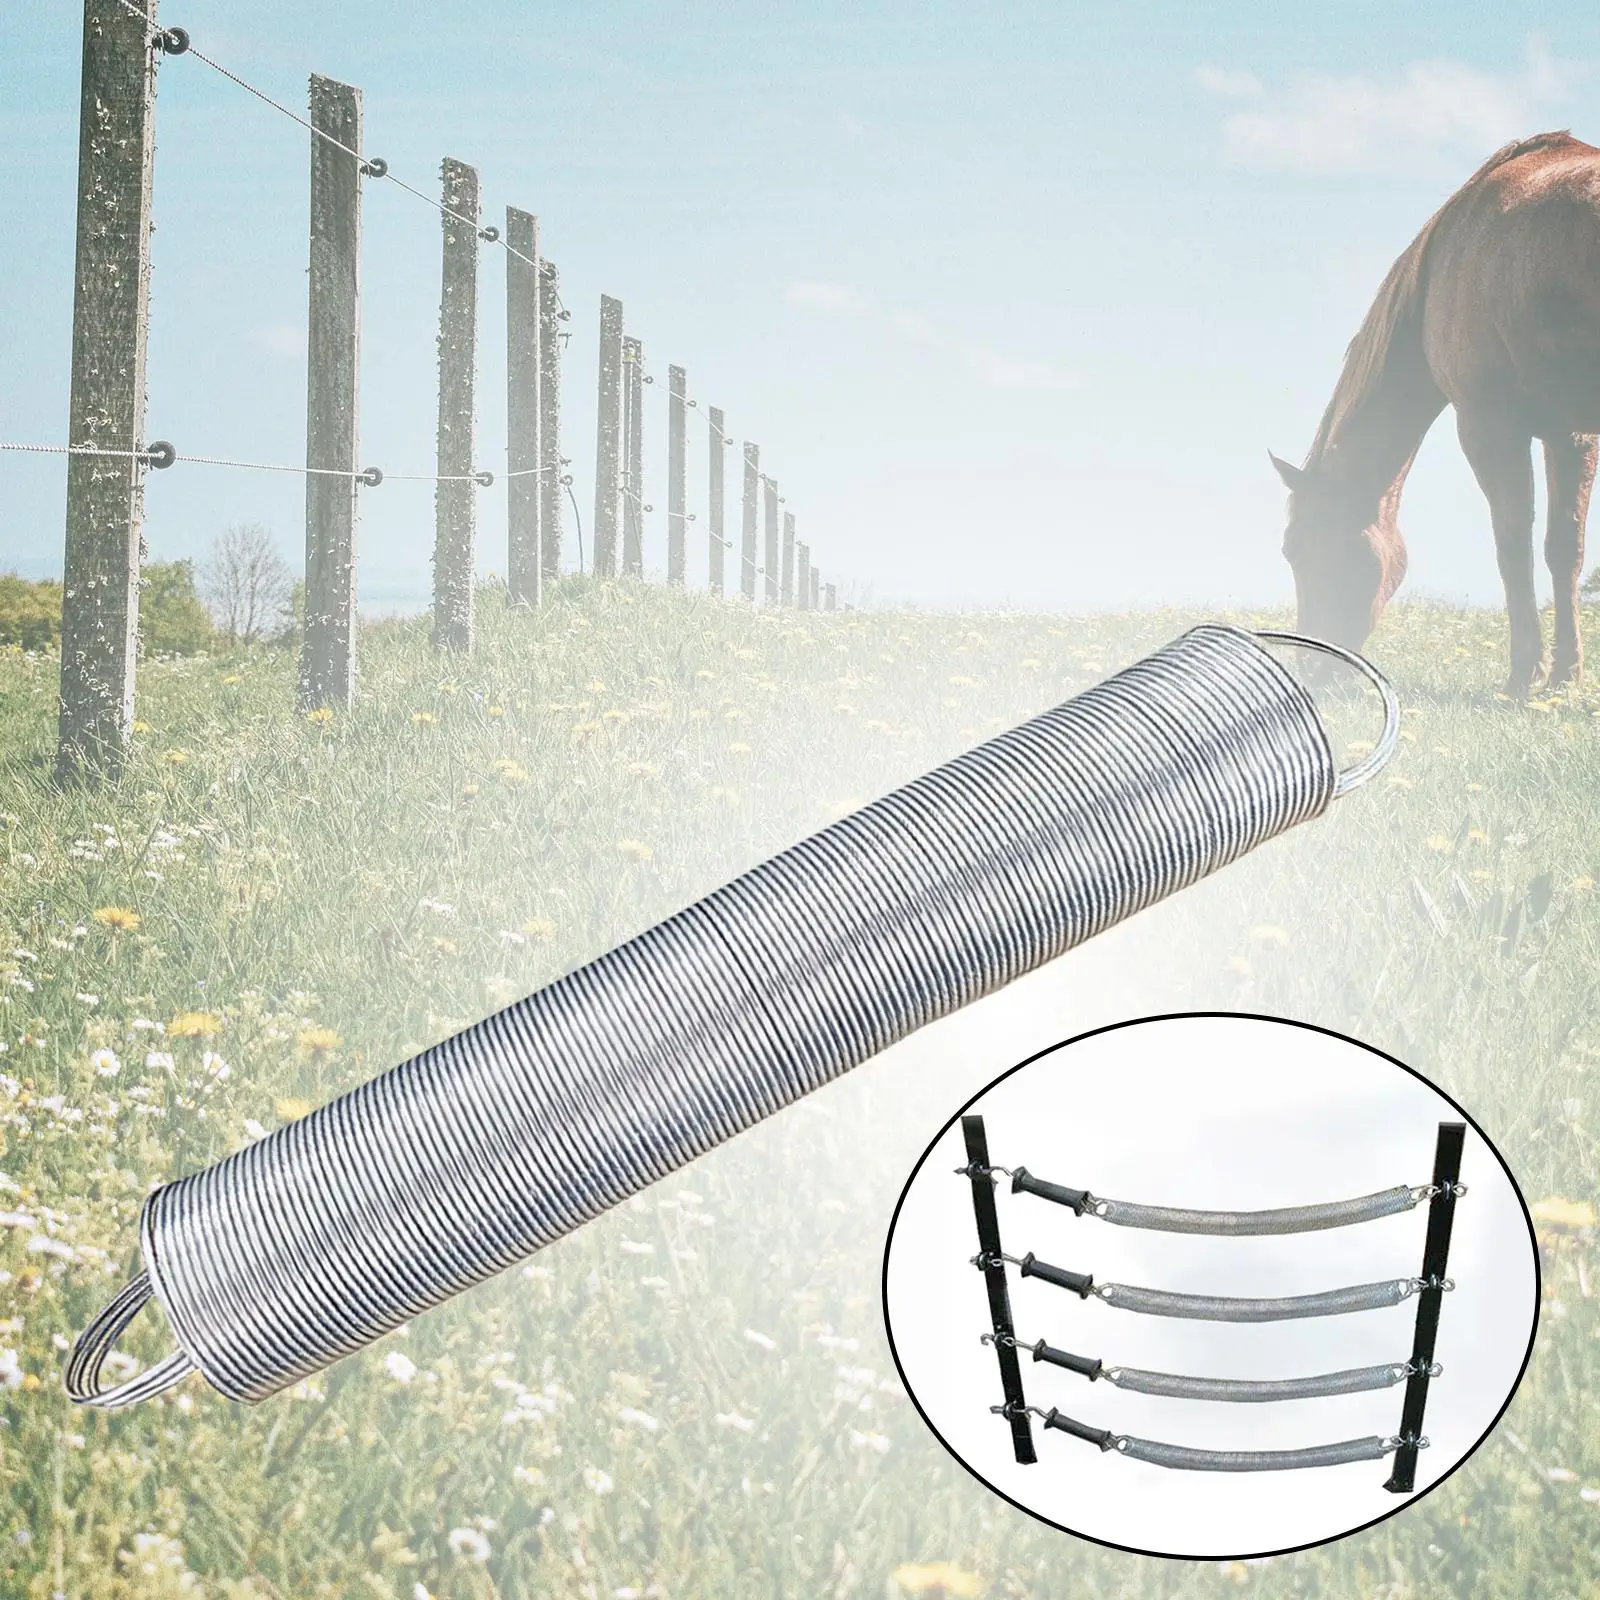 Livestock Fence Simple Installation Portable Practical Retractable Spring Gate Steel for Livestock Supplies Poultry Fencing Accs